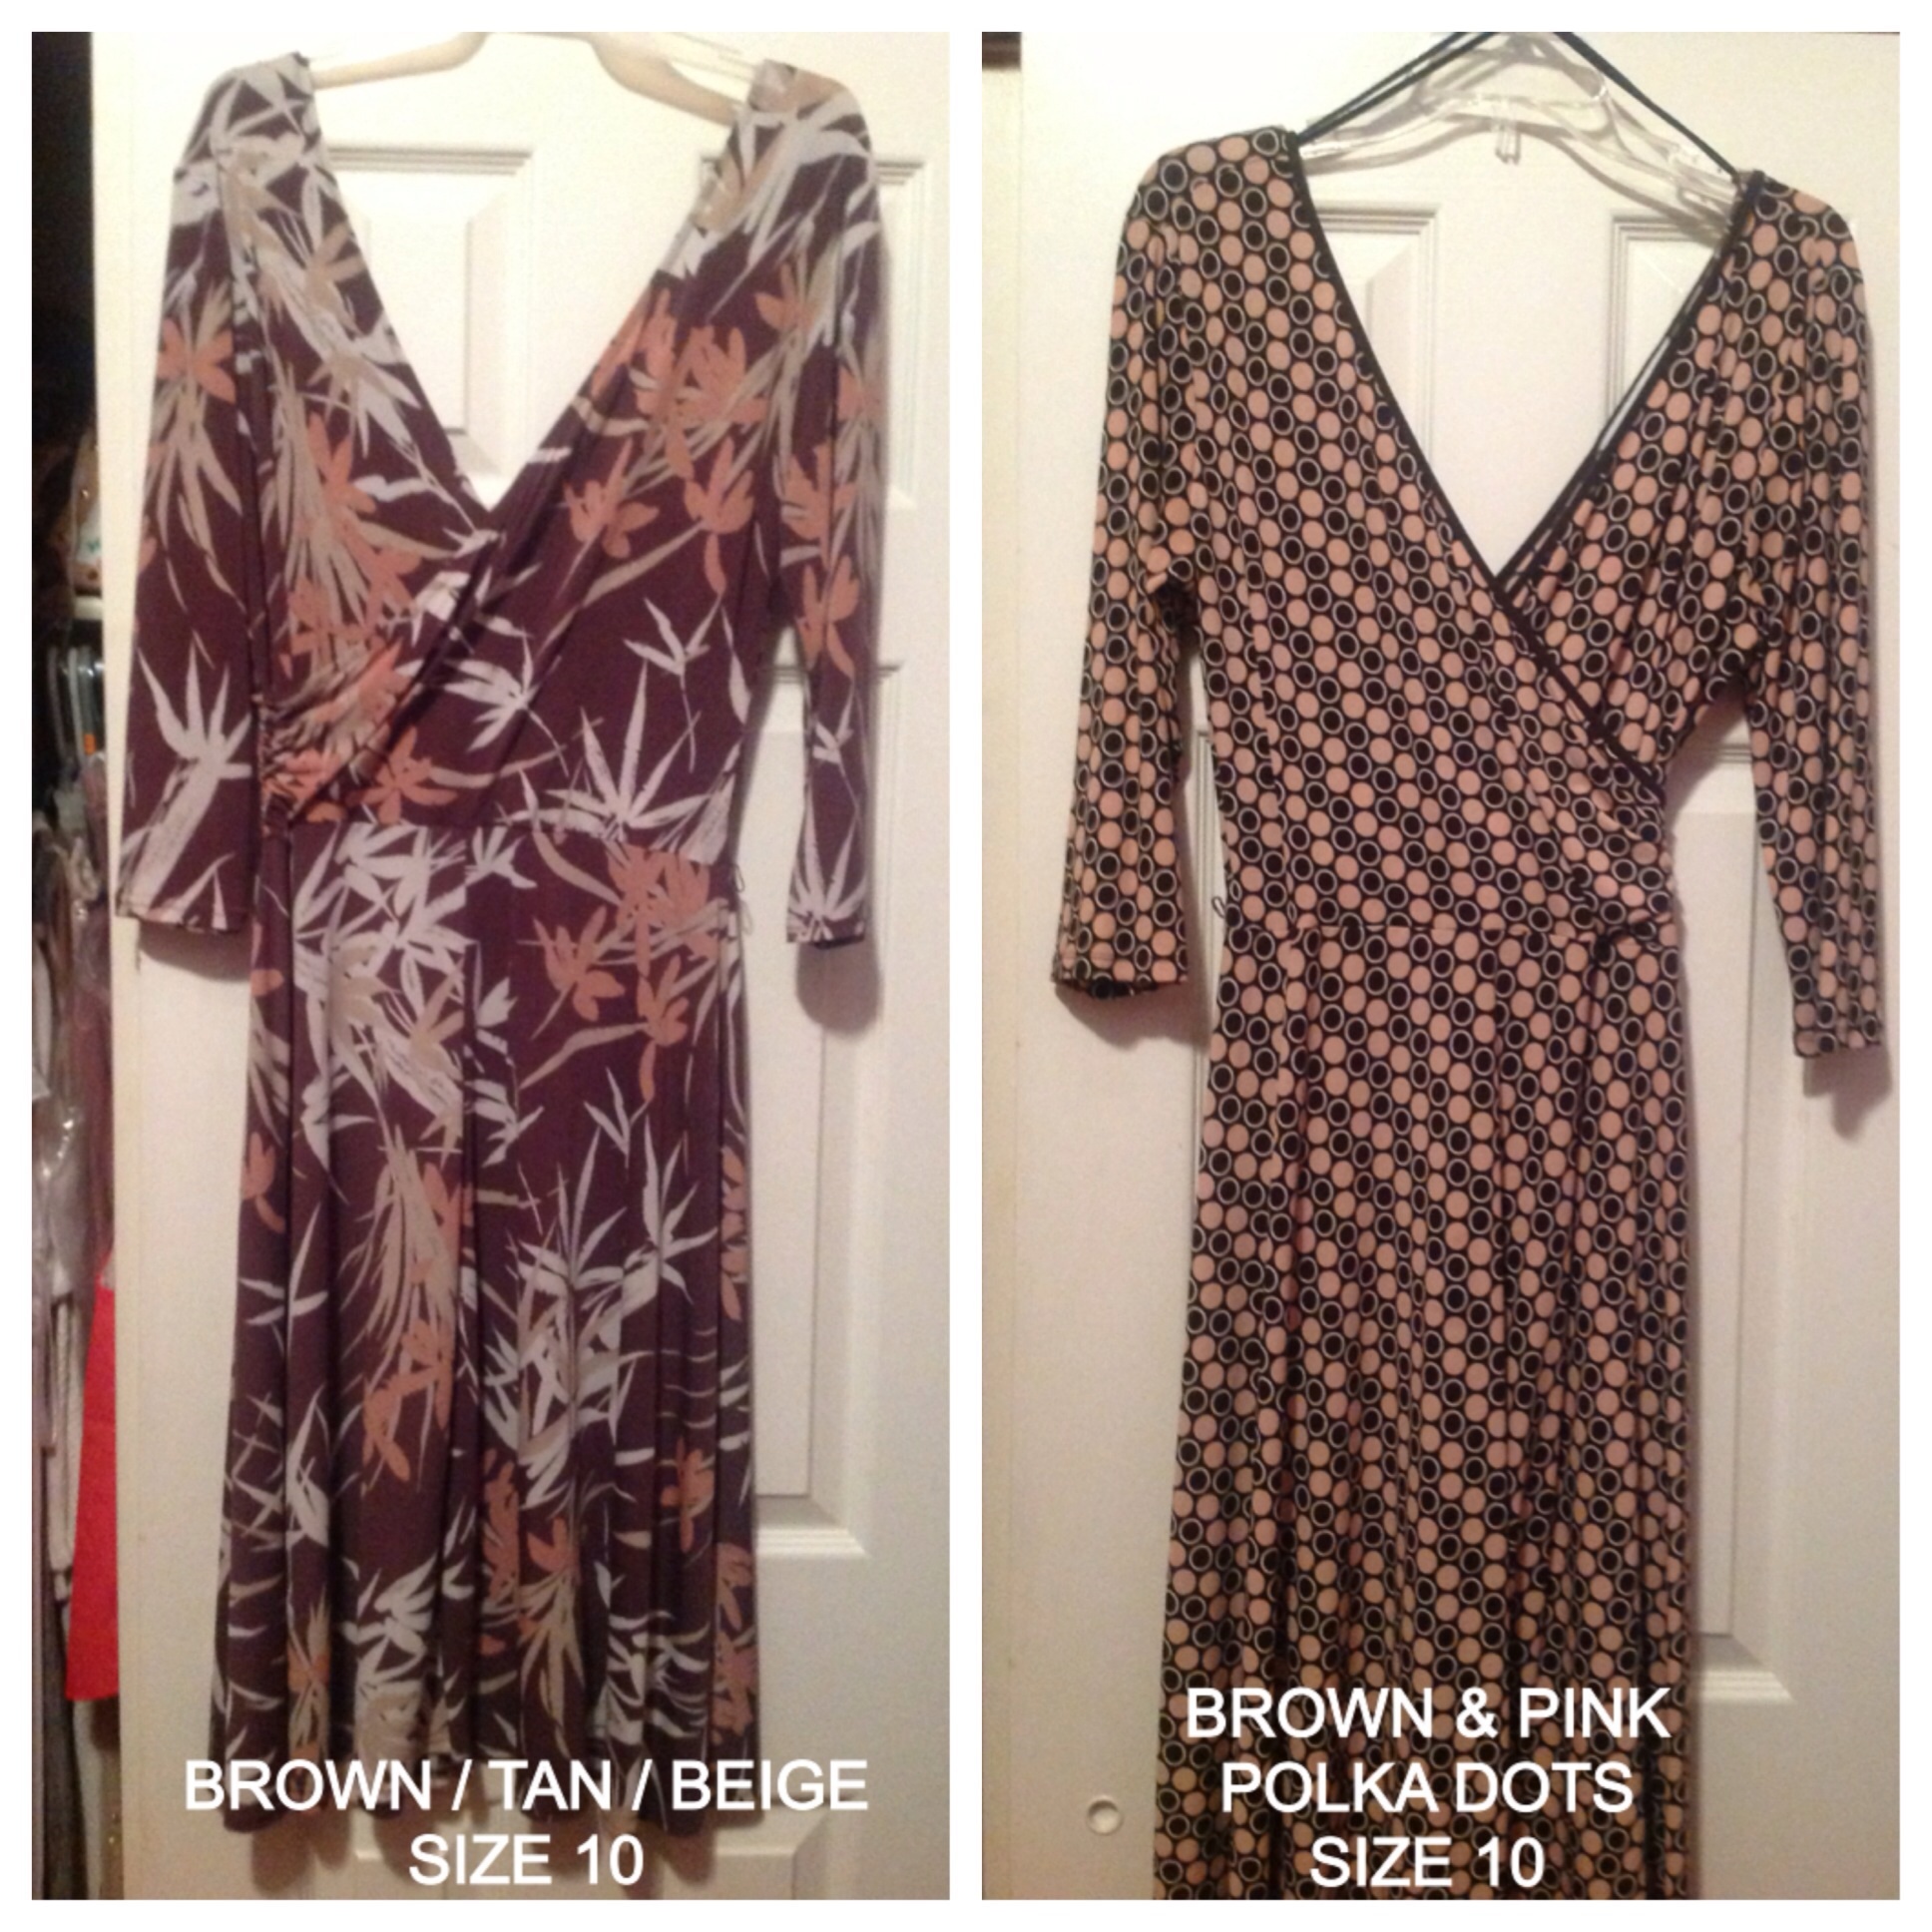 *CLEANING CLOSET DRESS SALE, NEW/GENTLY WORN DRESSES~ WORK OR